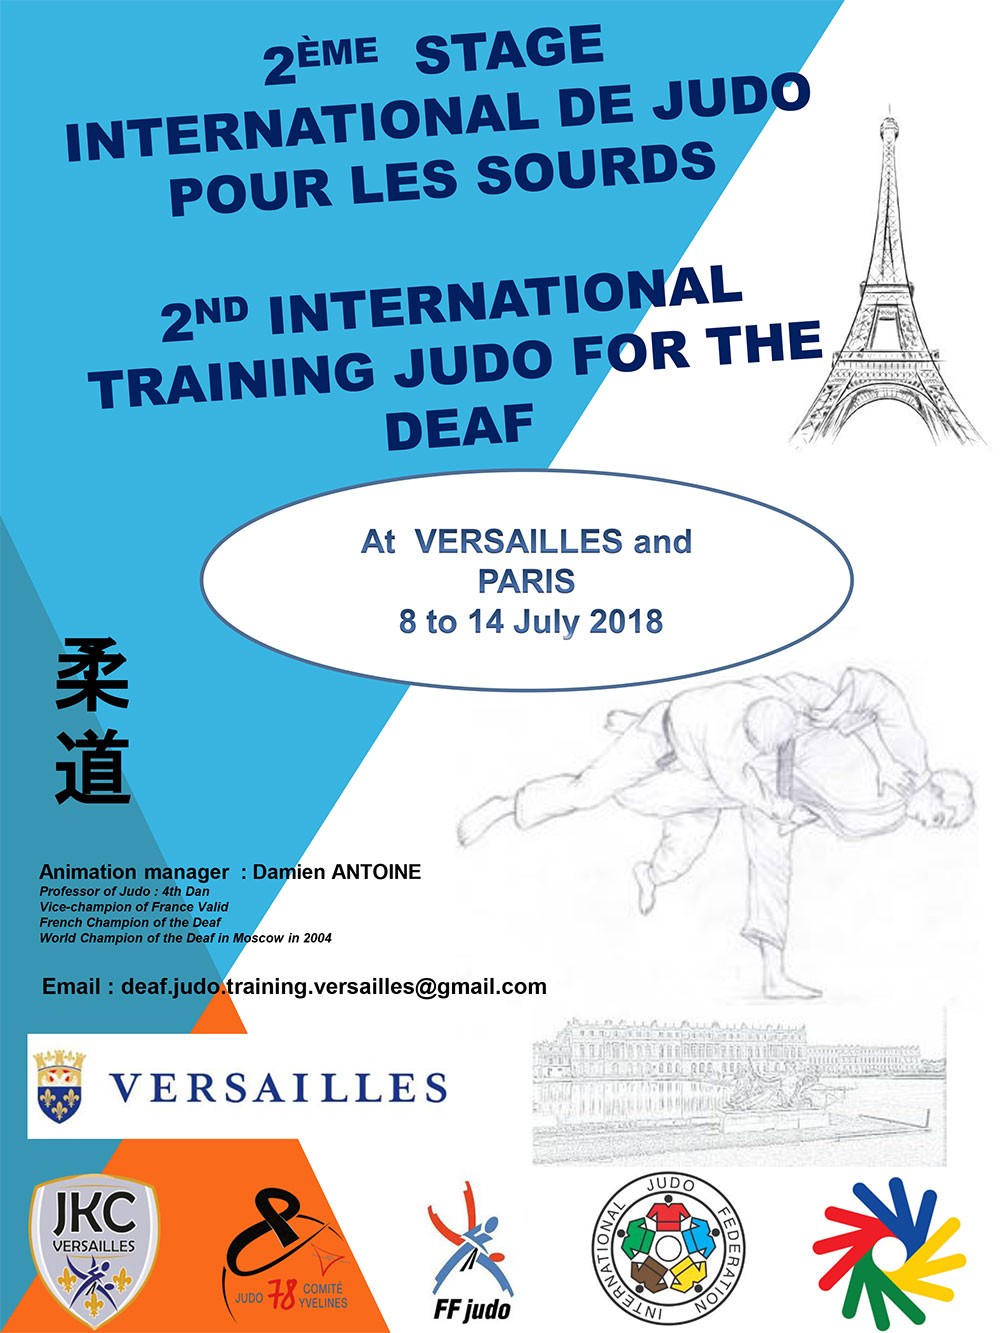 Preparation of the World Championships Judo for the Deaf in Turkey from 18  to 24 July 2016 /